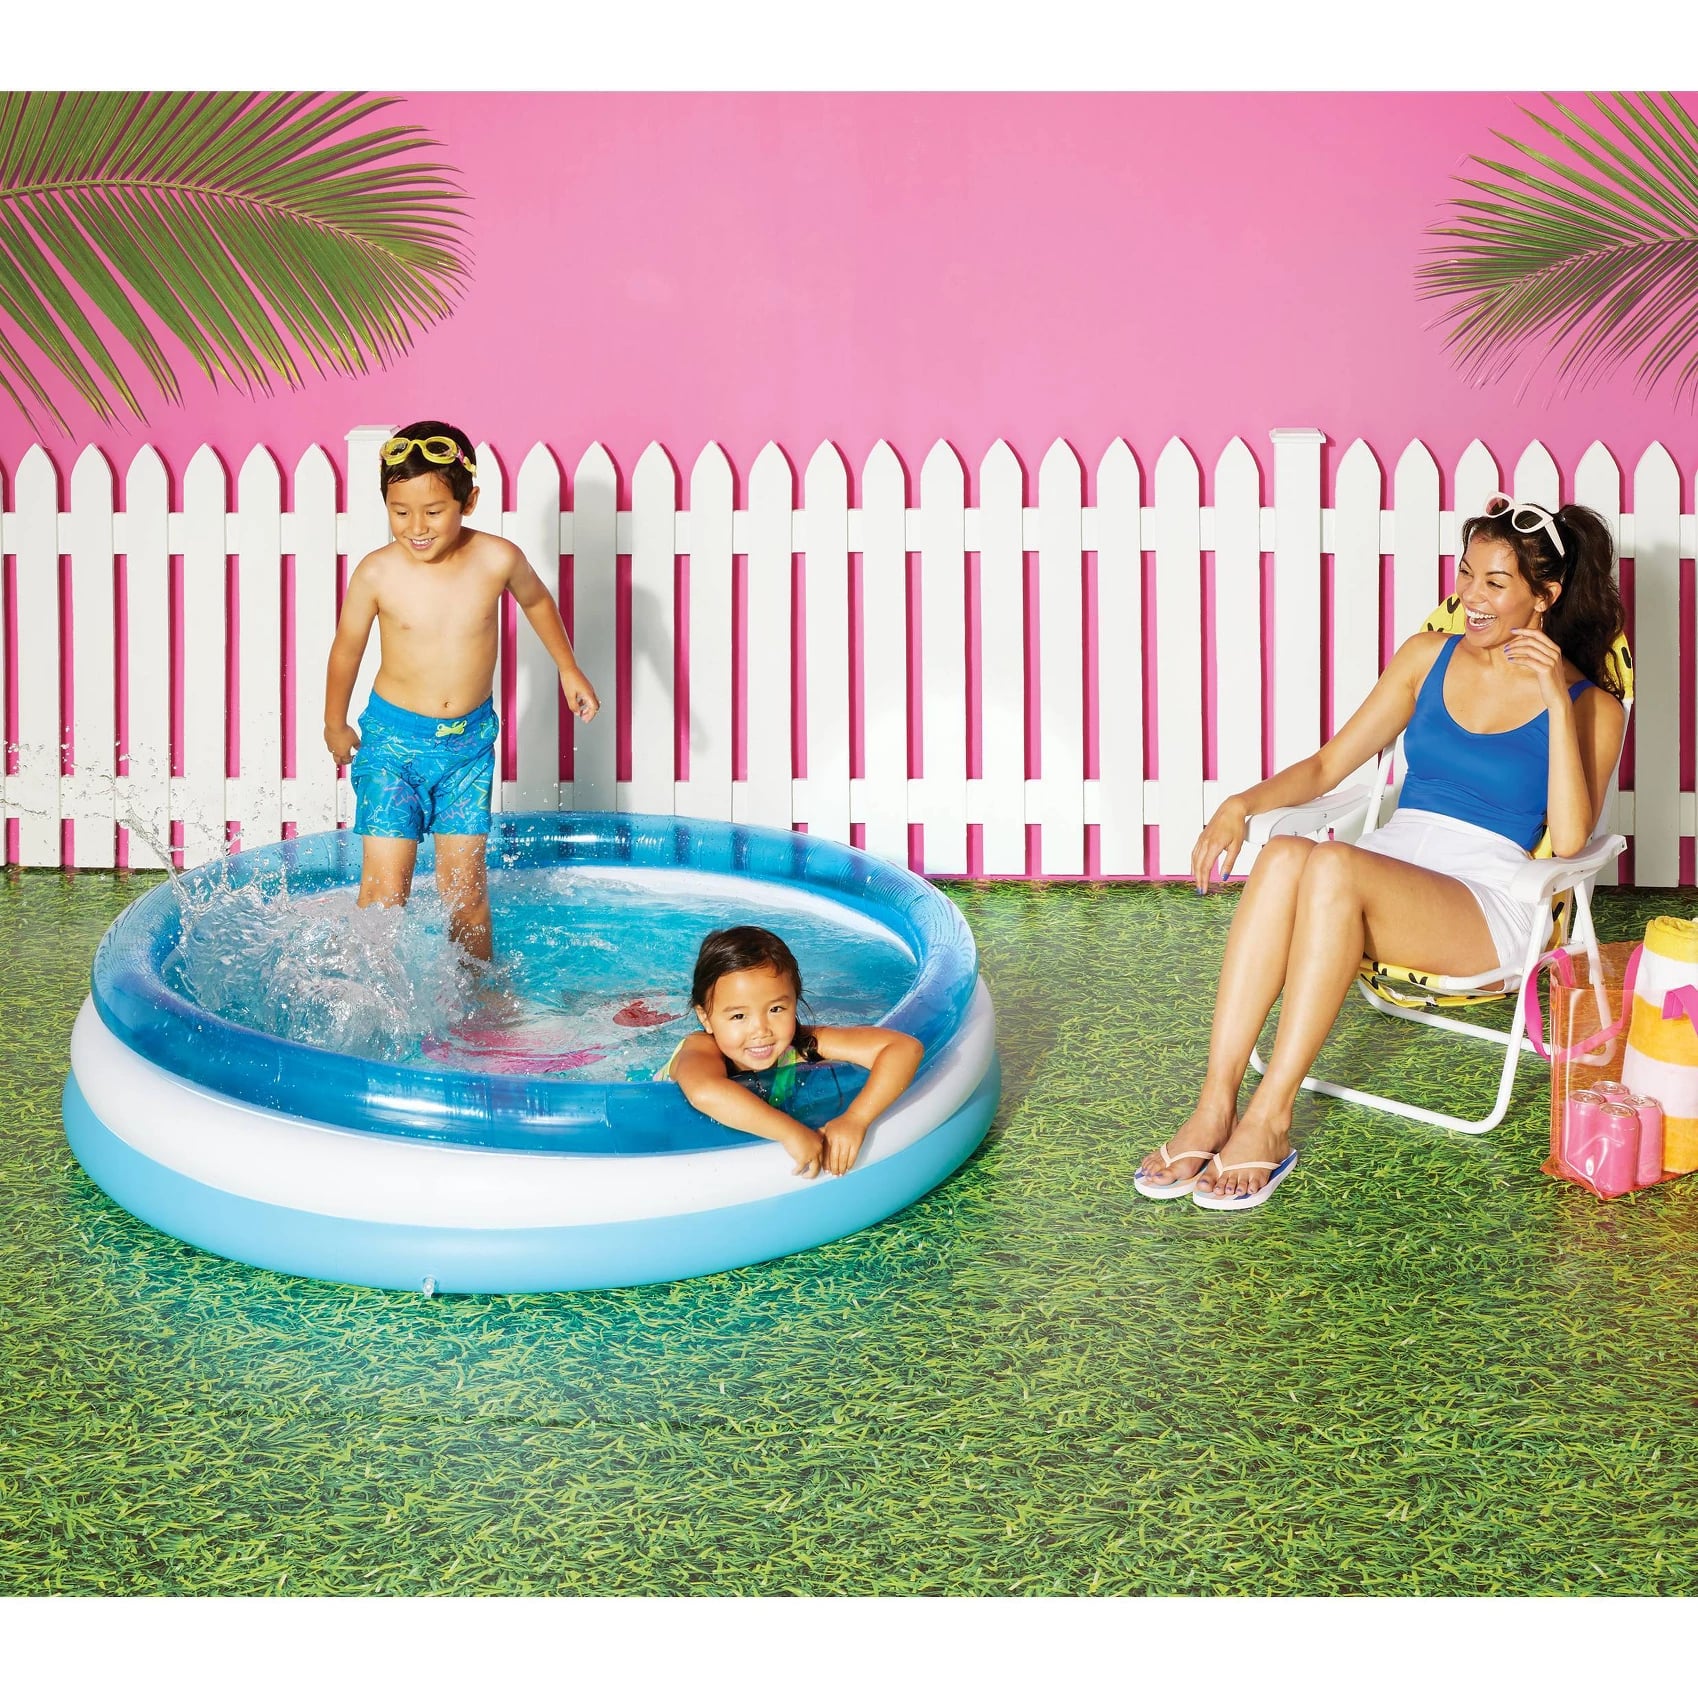 Baby Wading Swimming Pool Kiddie Pool for Outside Backyard Play iBaseToy Paddling Pool Splash Pad Water Toys for Boys & Girls Sprinkler Pool with Inflatable Soft Floor for Kids Toddlers Garden 